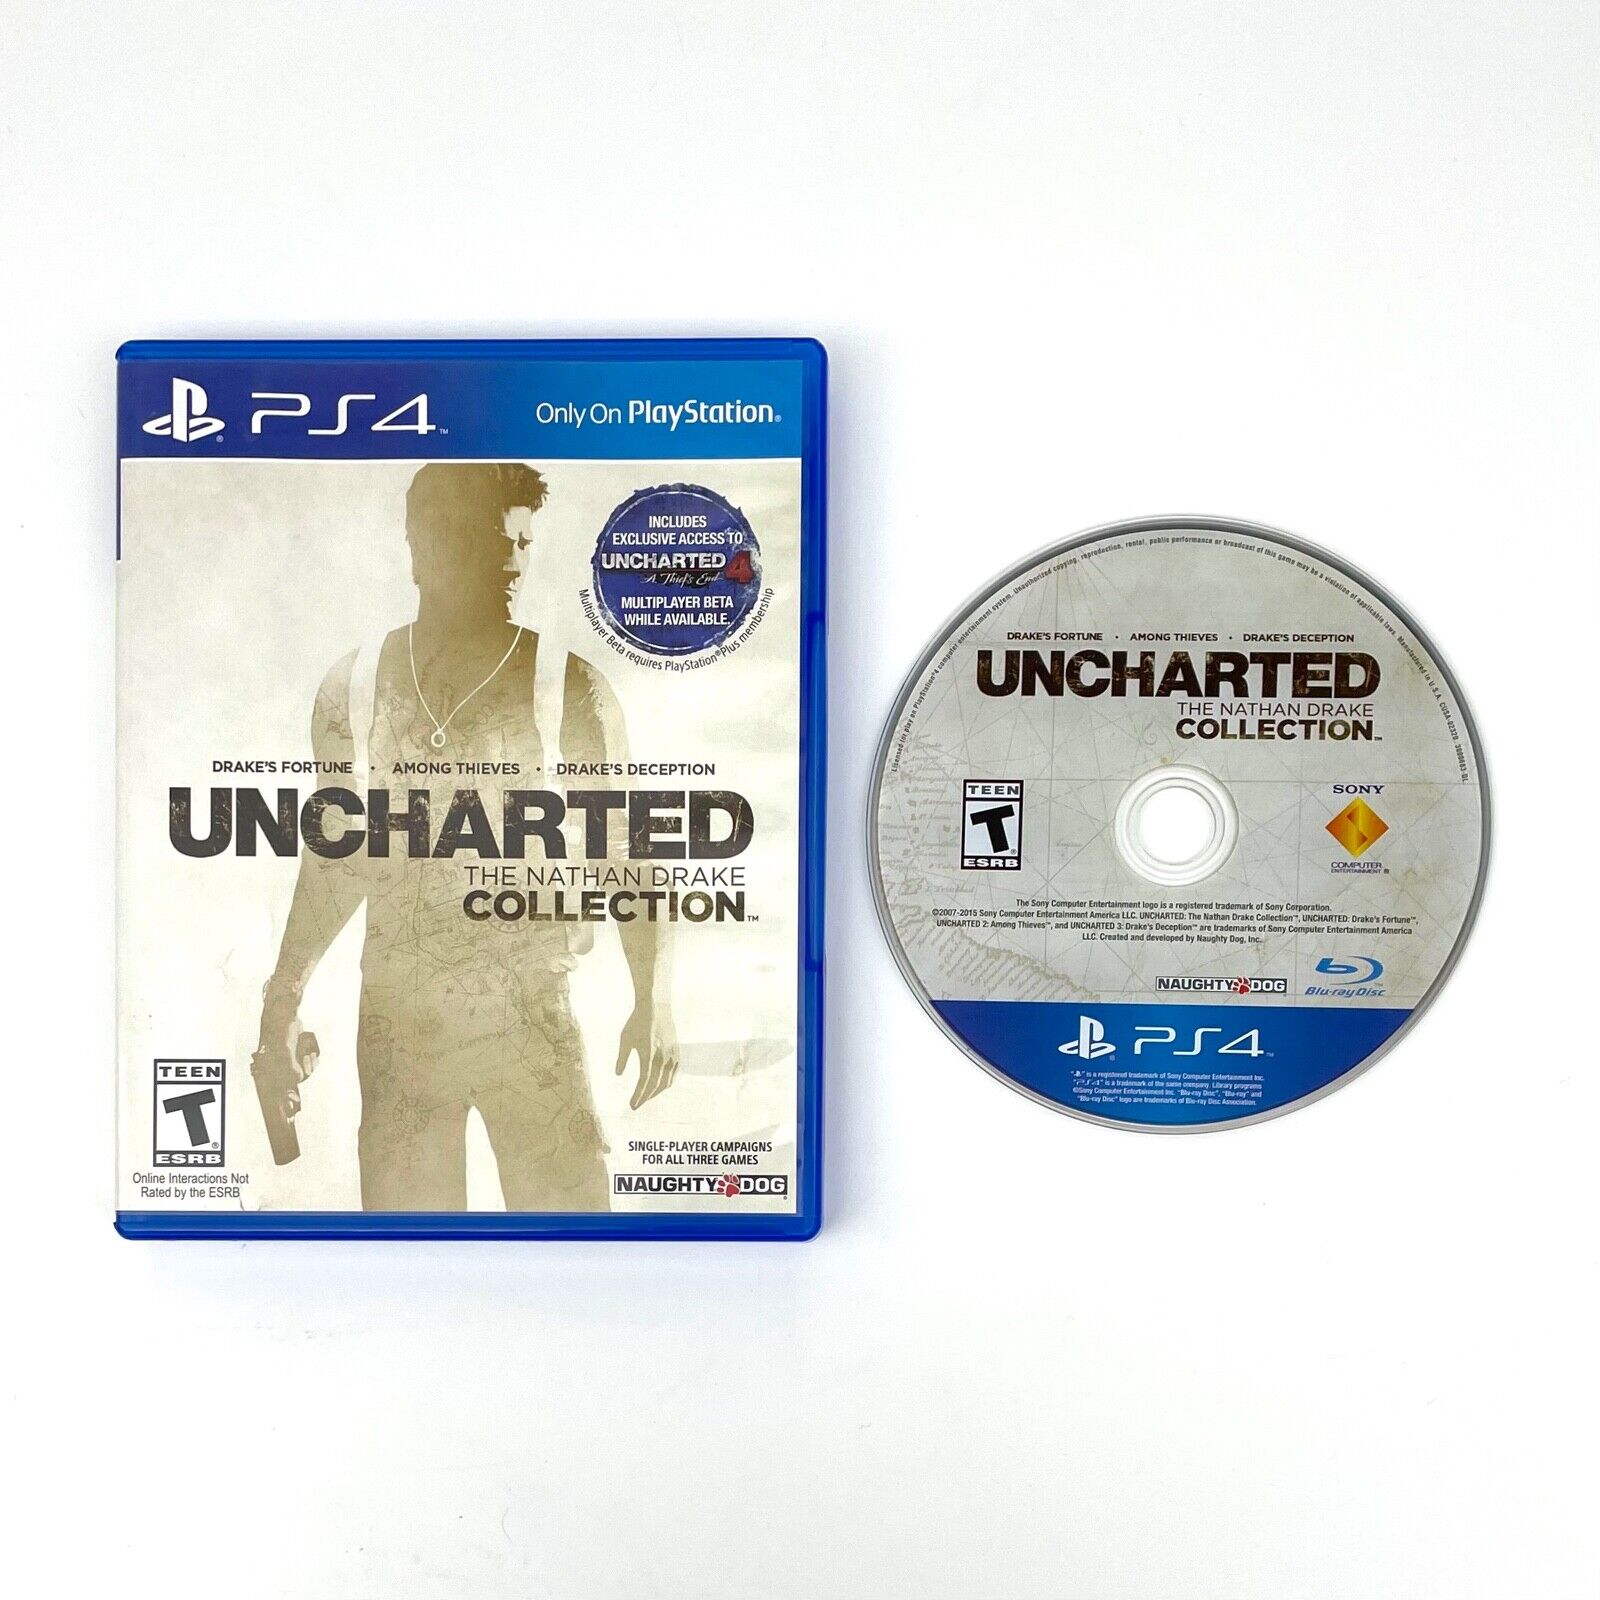 Uncharted The Nathan Drake Collection - Playstation 4 PS4 - First 3 Games eBay